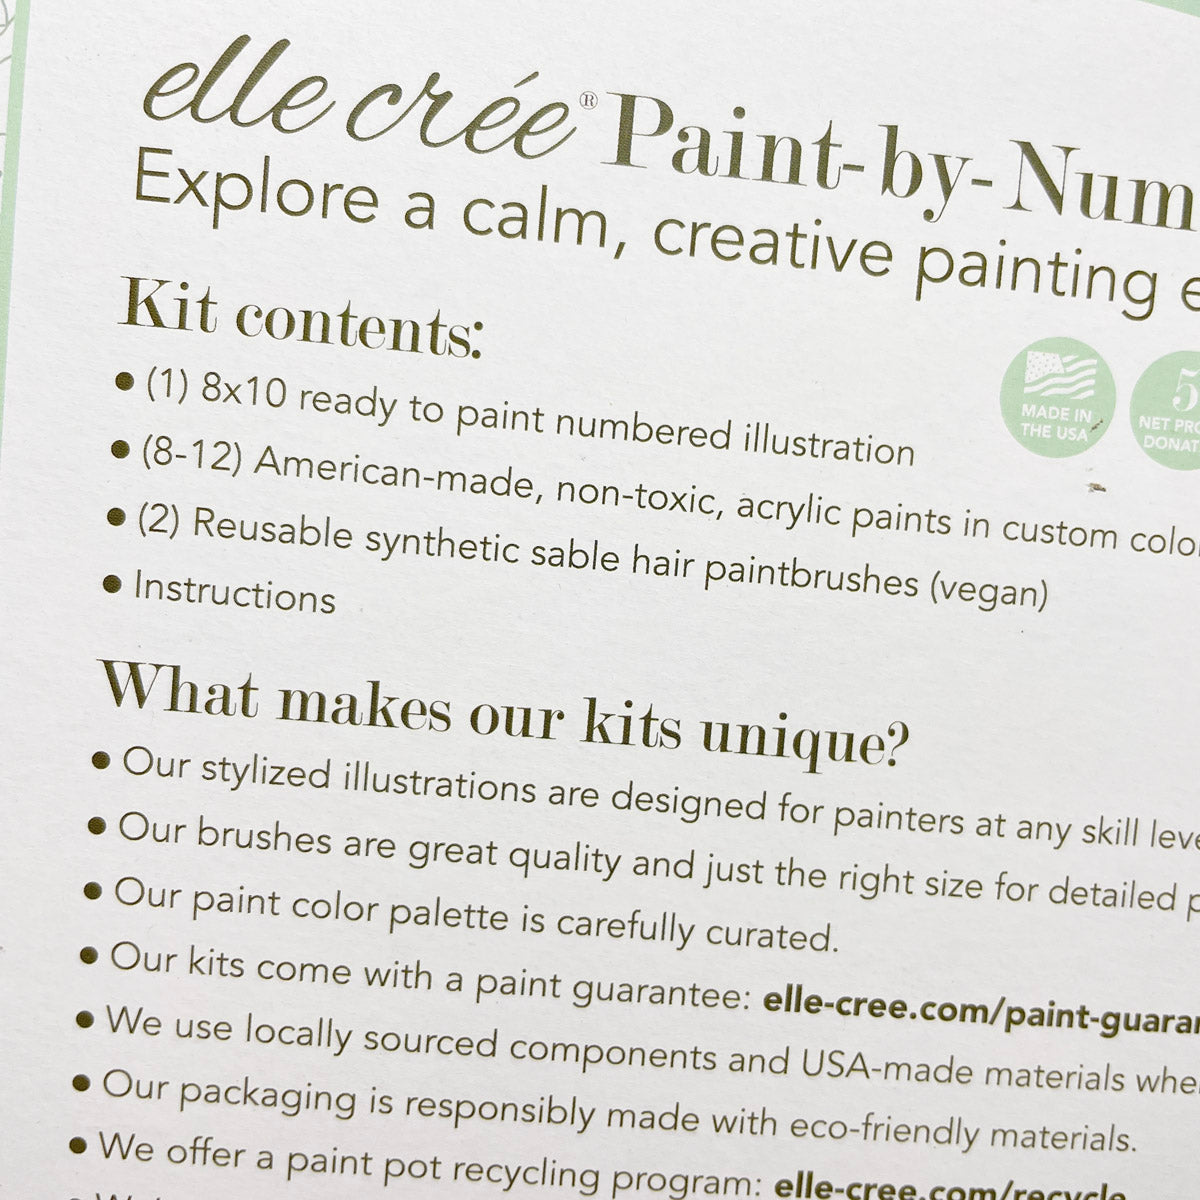 NEW // Bonnie Bunny Paint-by-Number Kit